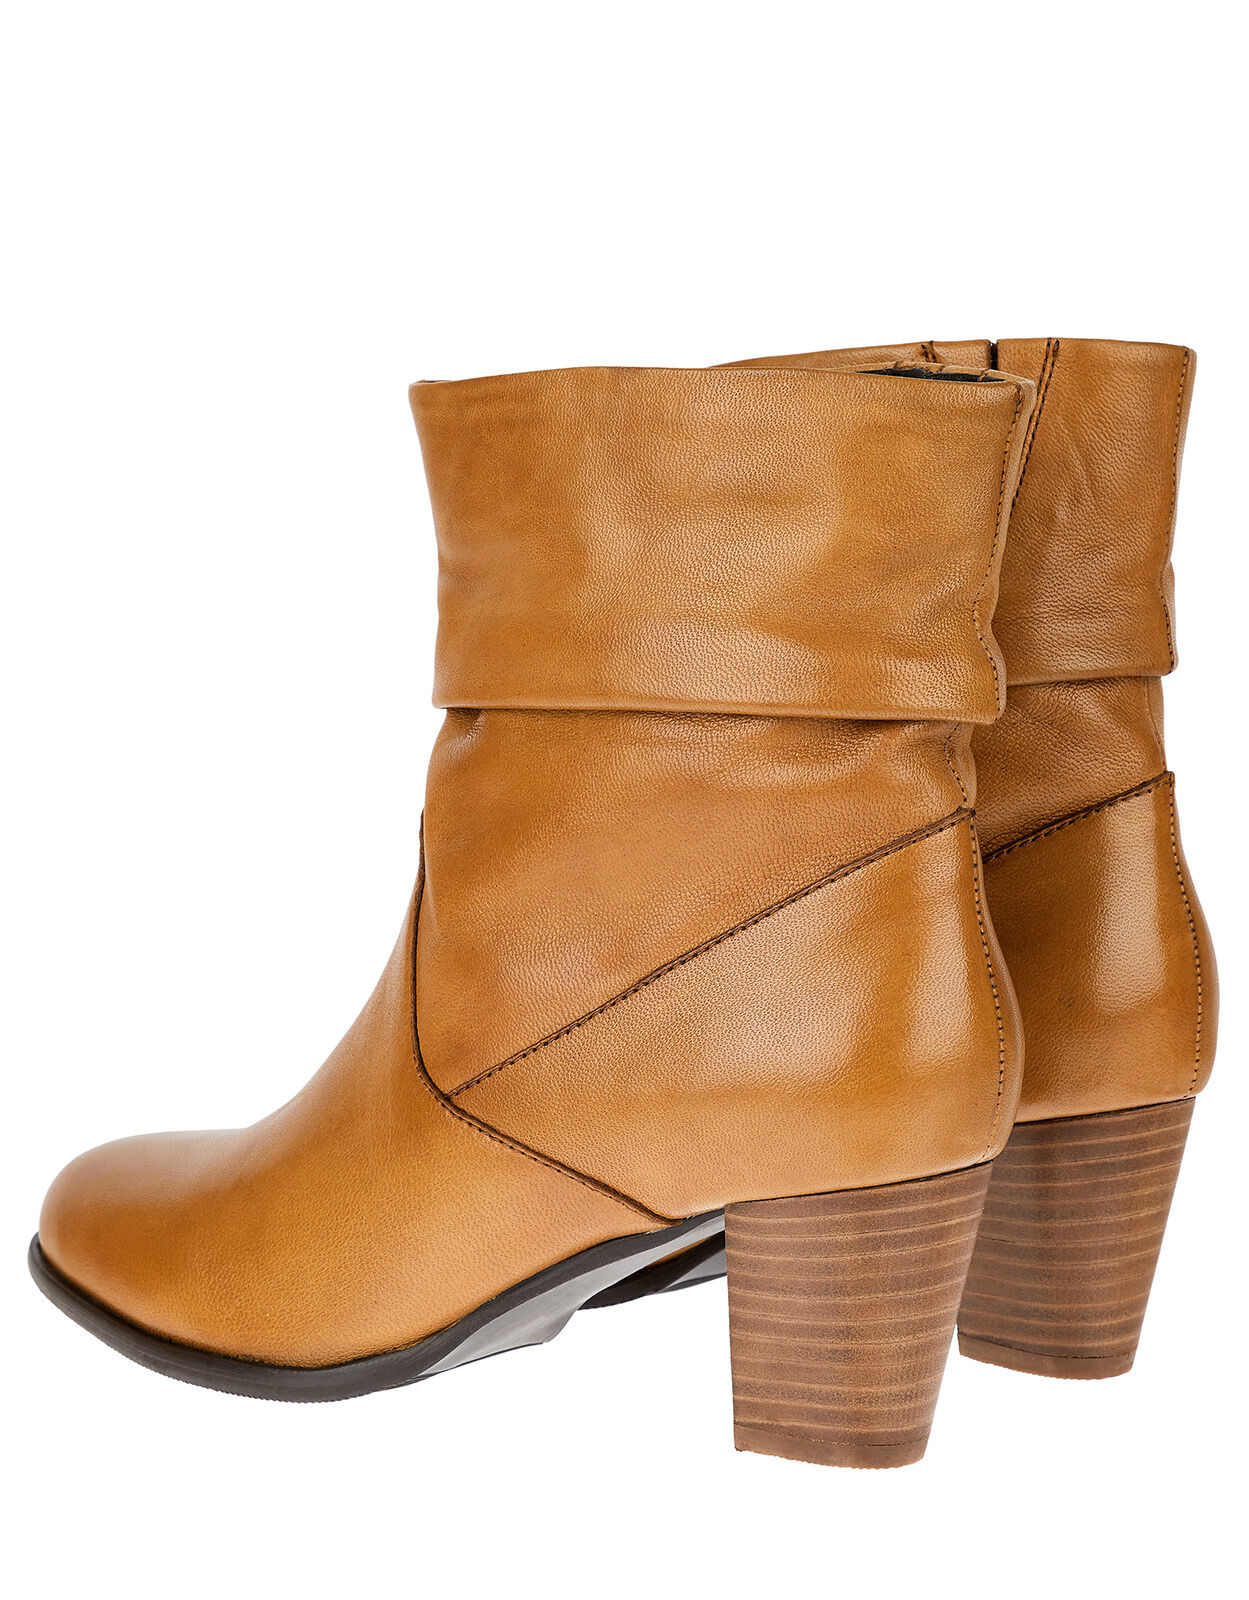 tan leather ankle boots uk